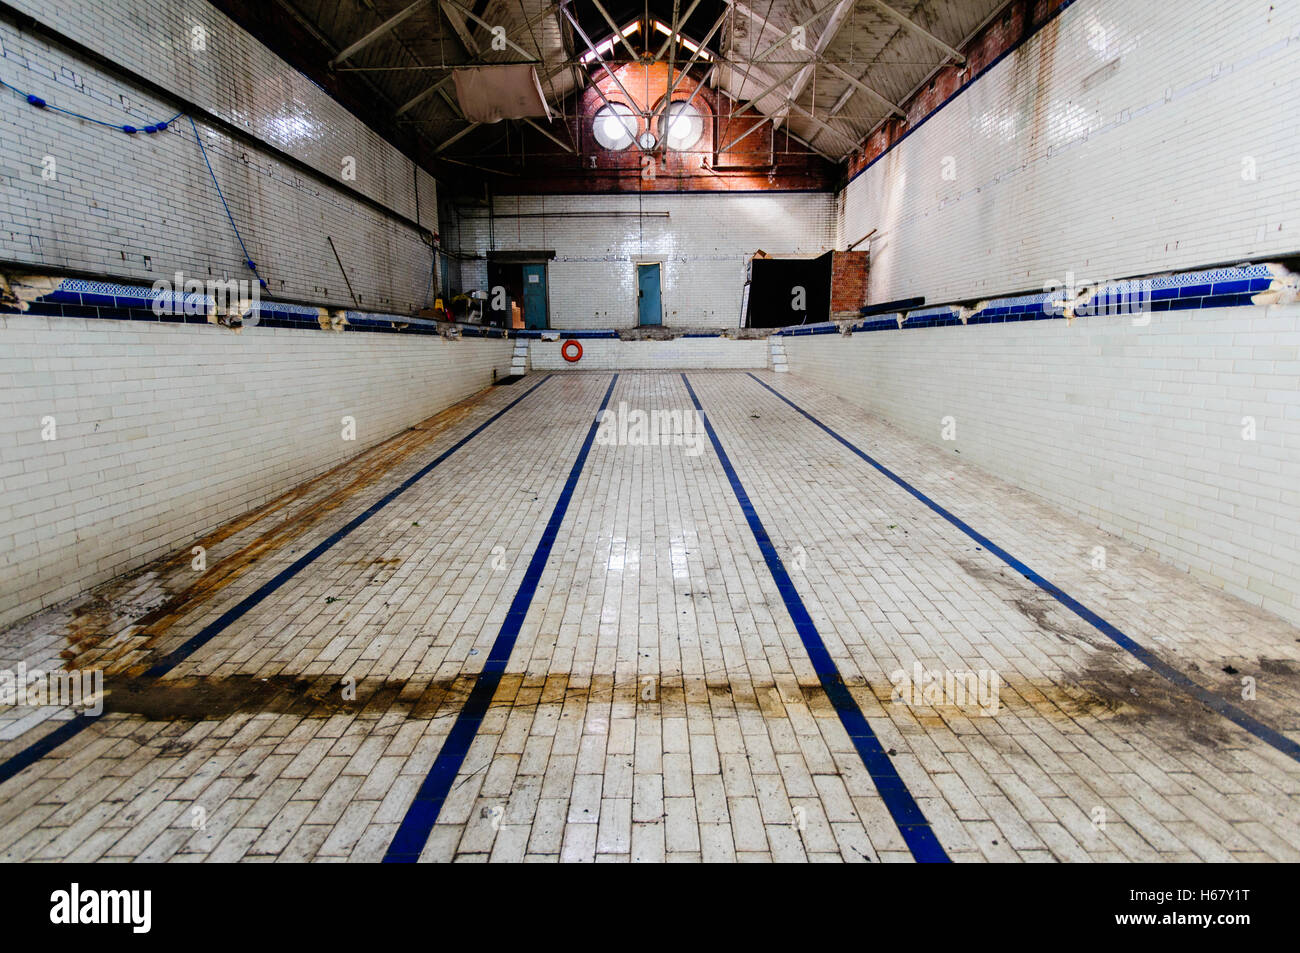 Templemore Baths, Belfast, one of three public baths built during Victorian times for people to wash with hot water. Stock Photo